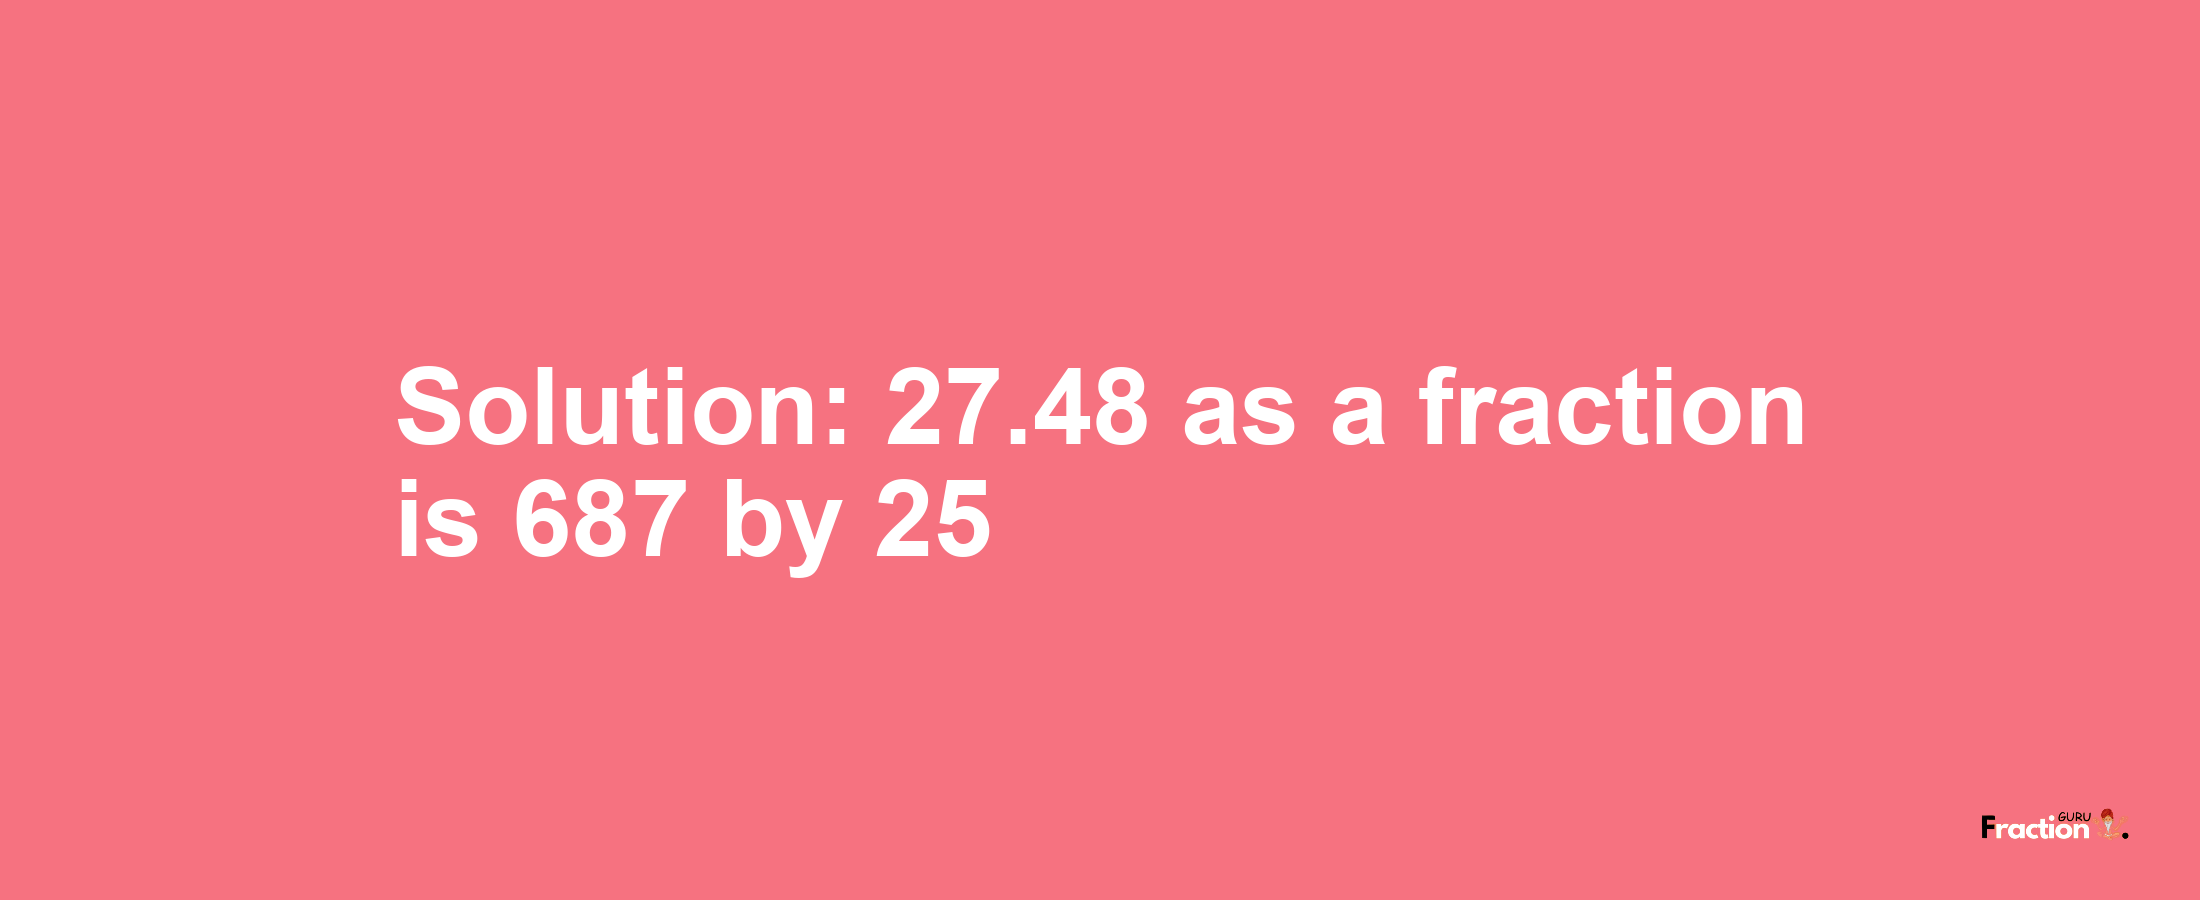 Solution:27.48 as a fraction is 687/25